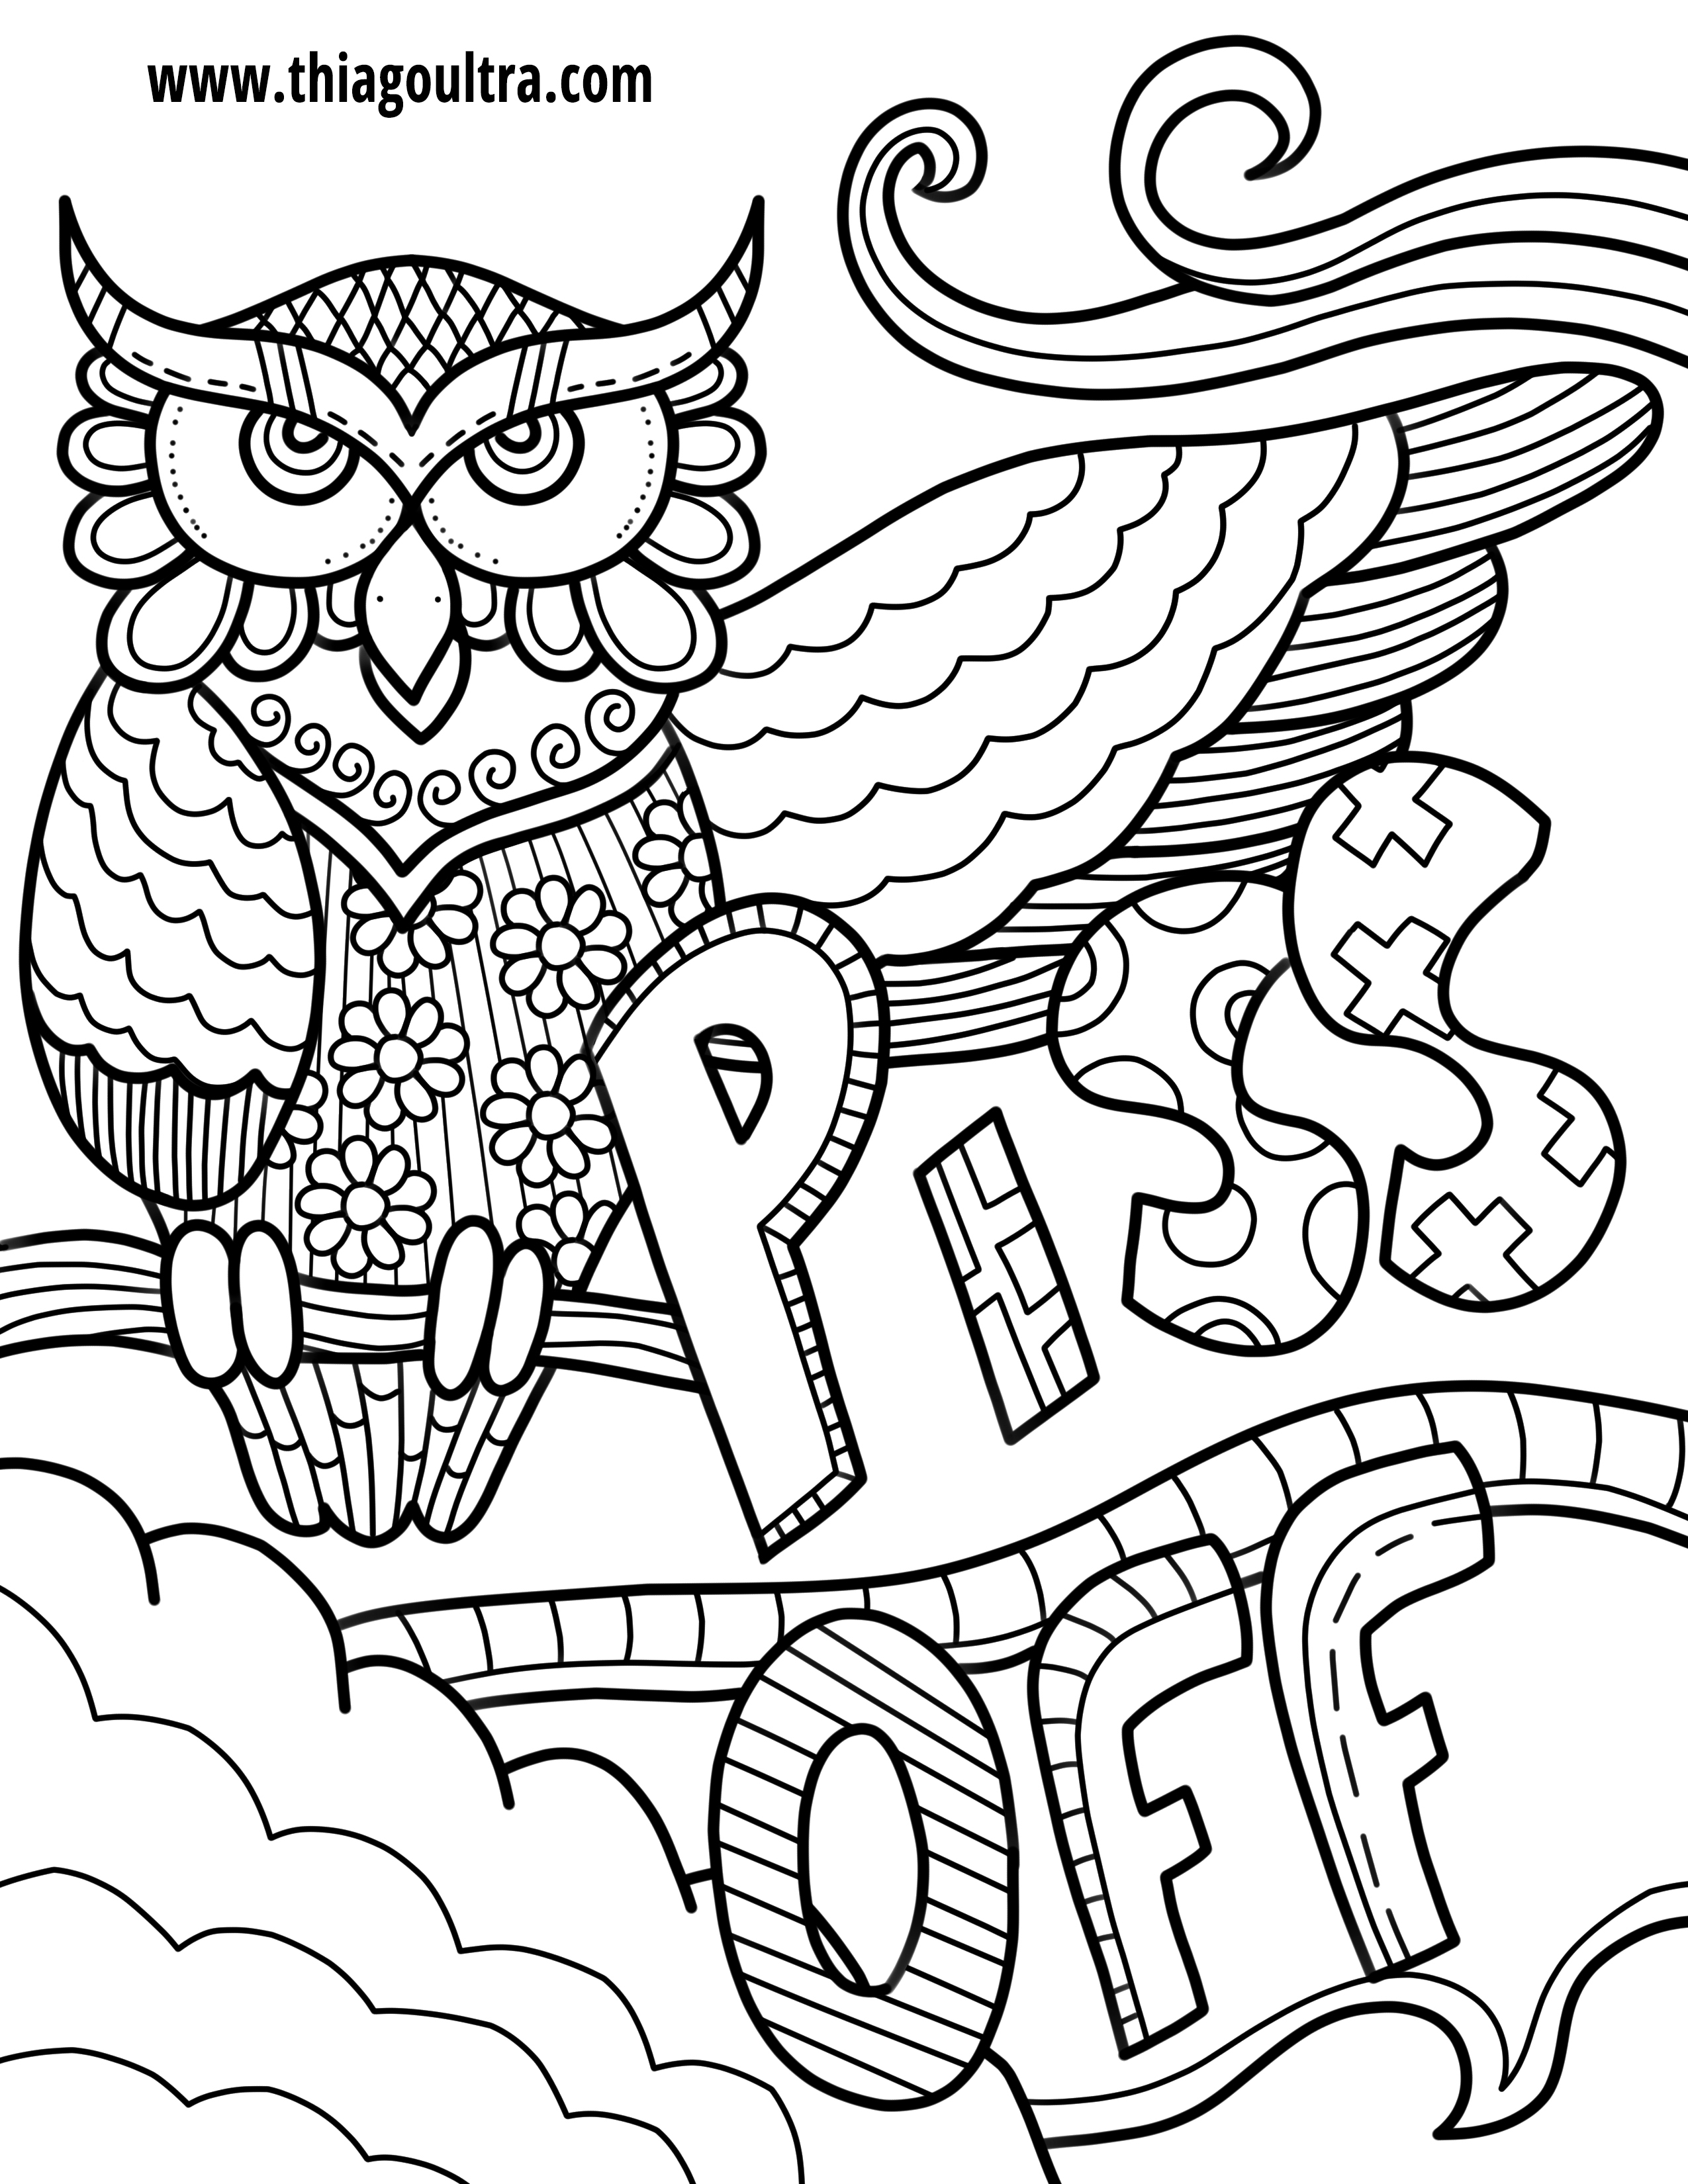 Free Printable Coloring Pages For Adults Pdf at ...